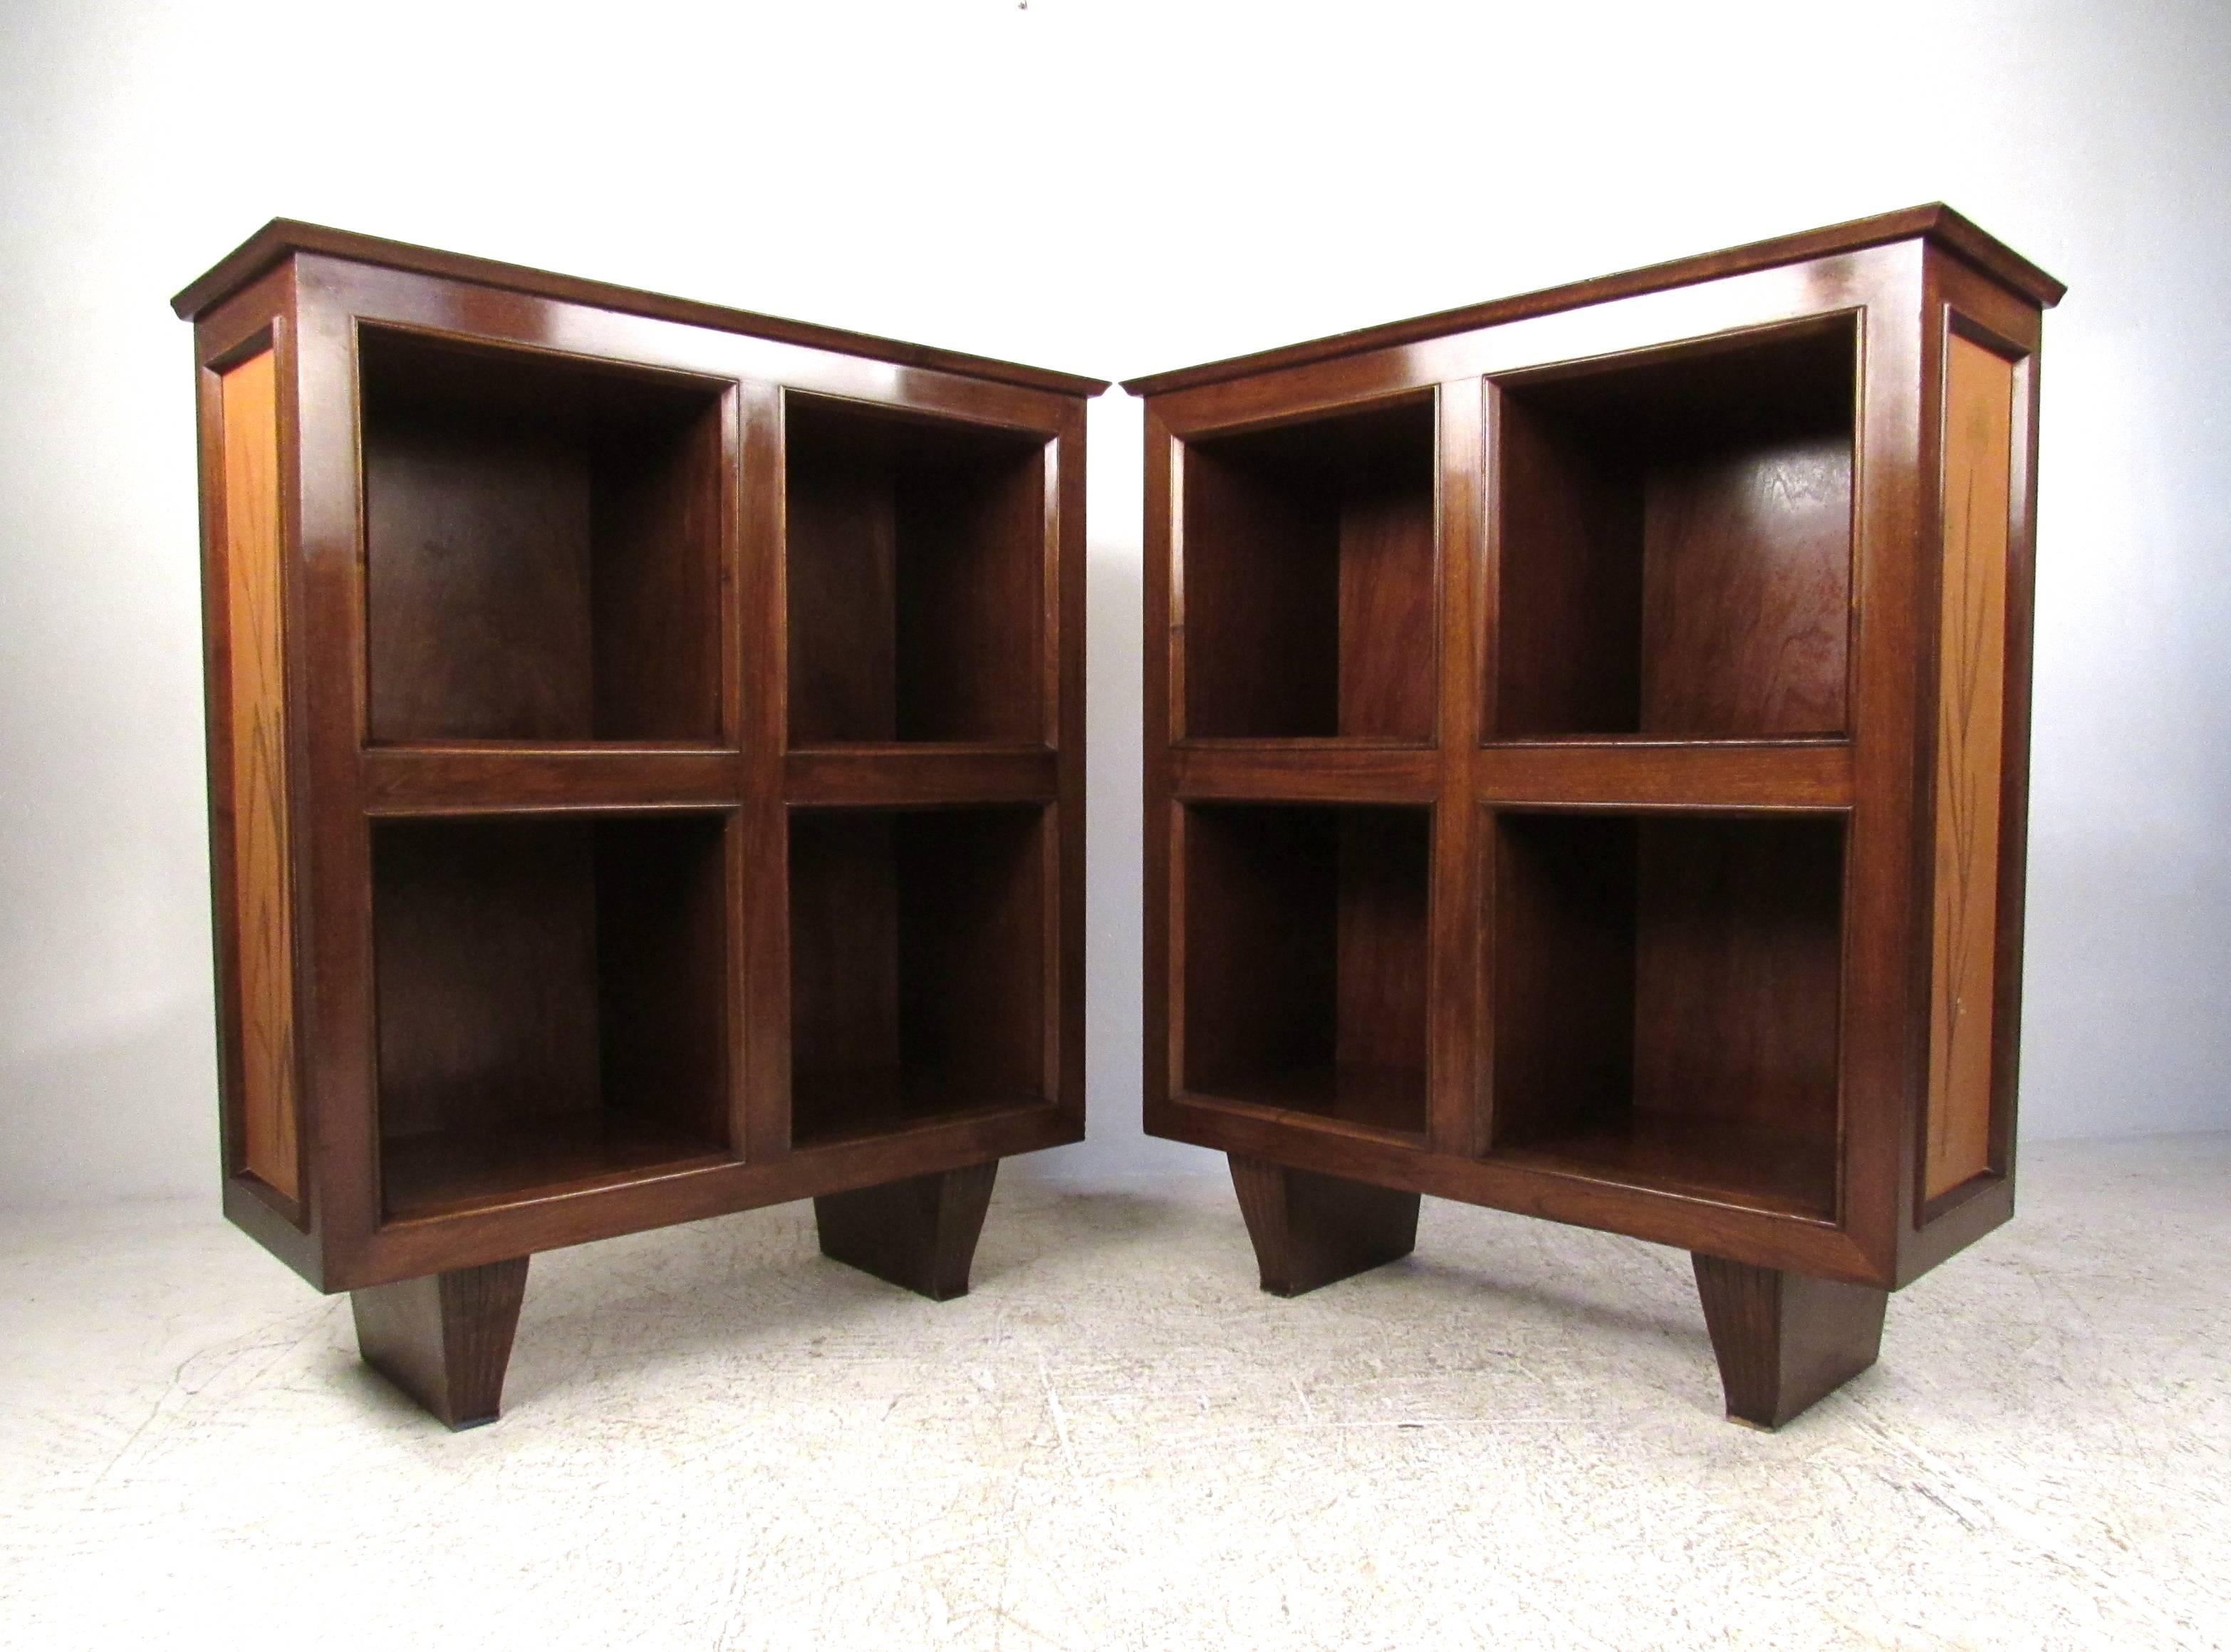 This matching pair of elegant walnut shelves features unique axe-head legs and subtle hand-painted illustrations on the sides. The rich finish of this set adds to the elegance, while the wide open shelves are ideal for storage or display. Please